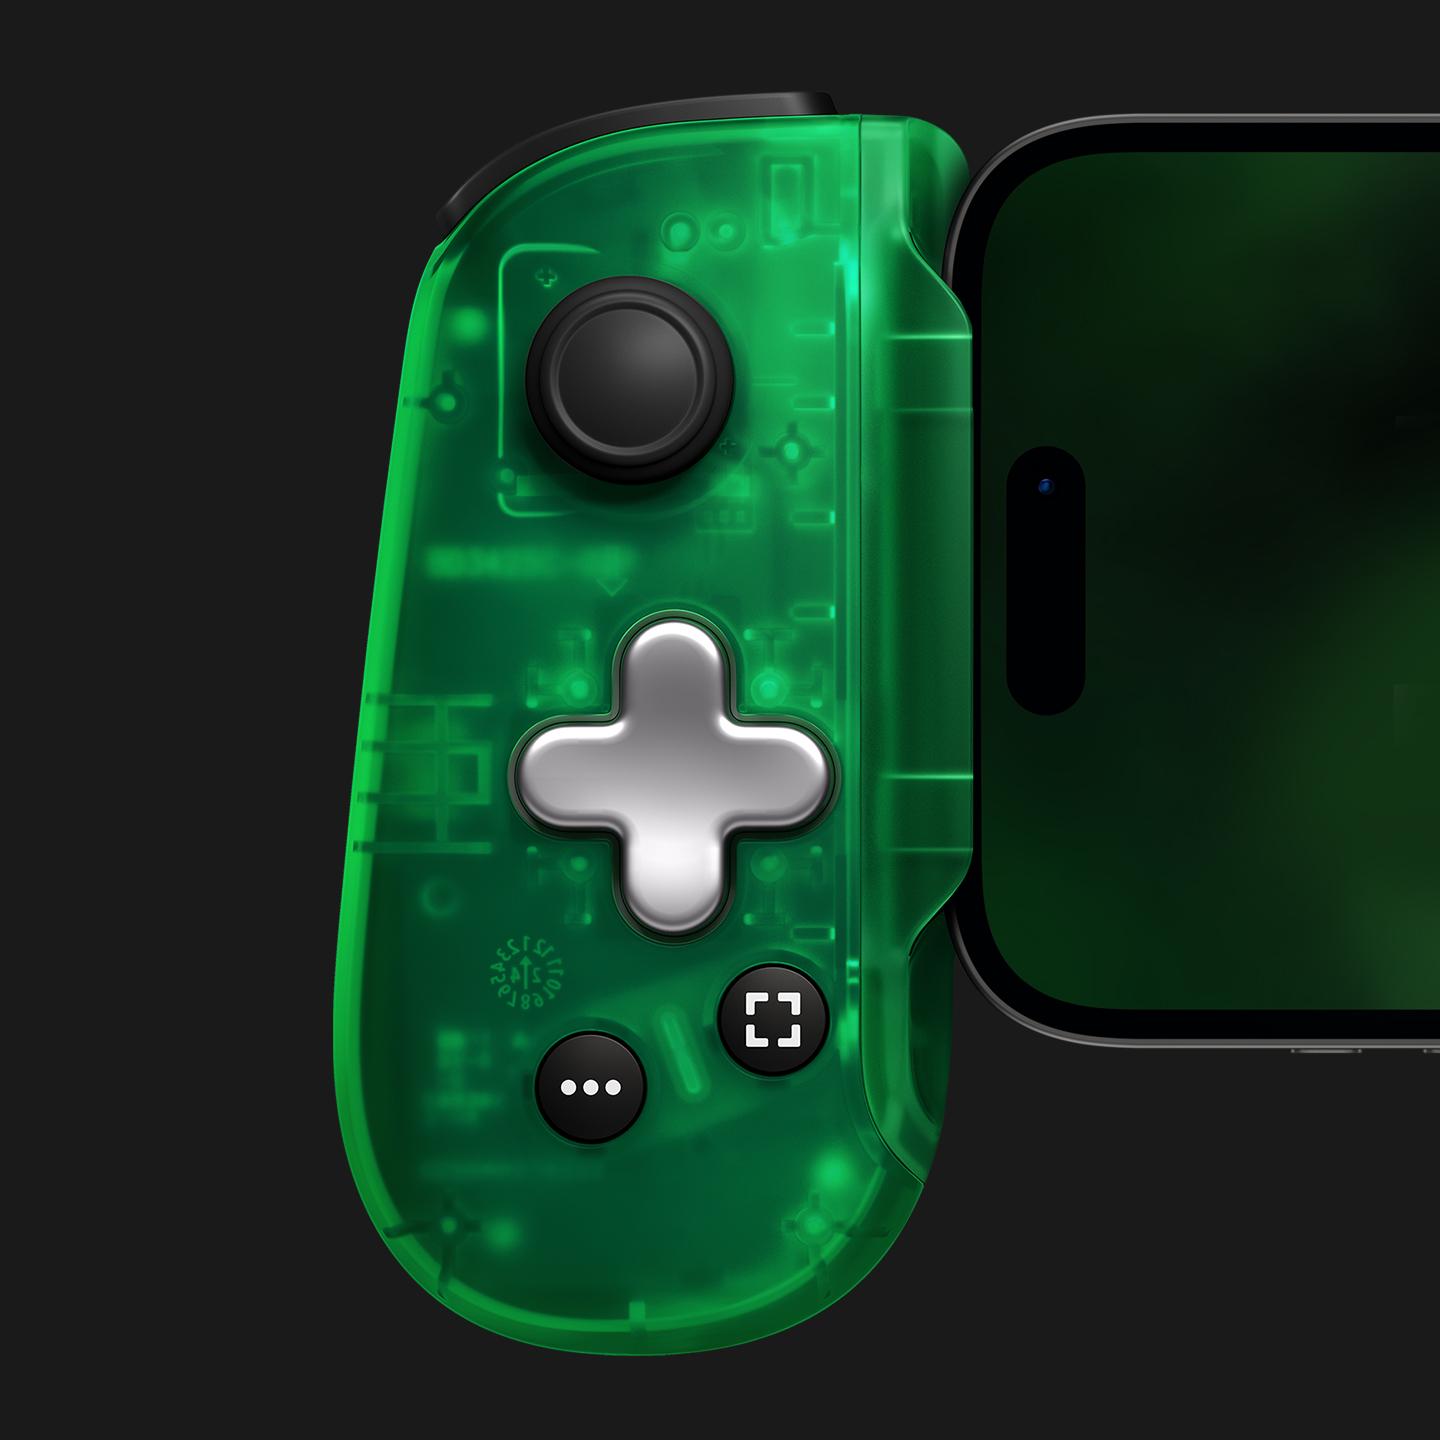 Backbone transforms your phone into the ultimate gaming console. Snap in and play any game or service that supports controllers - anytime, anywhere.